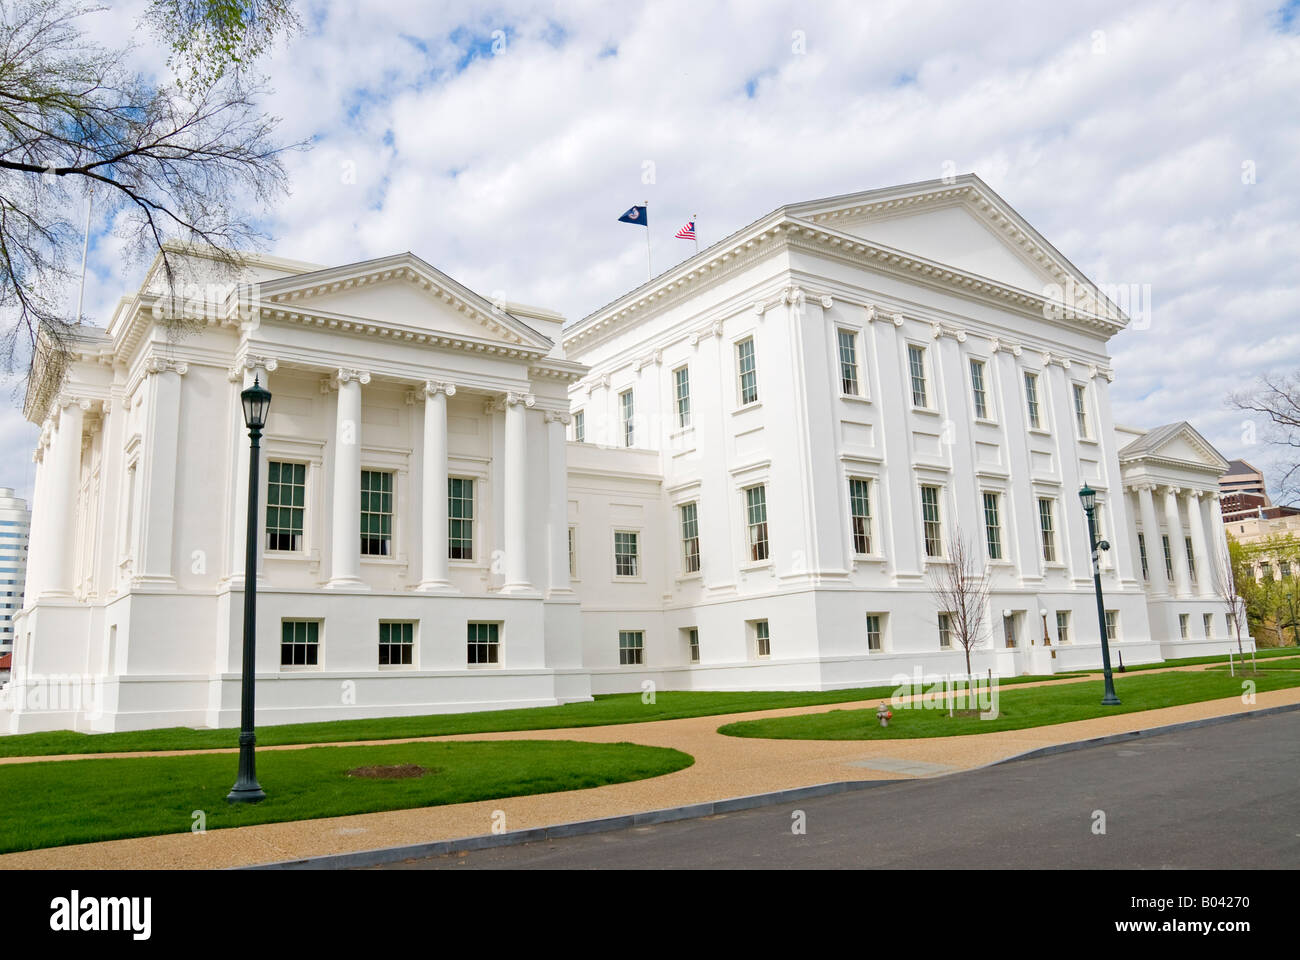 The Virginia State Capitol building in Richmond, Virginia, the seat of the Virginia state government. Stock Photo